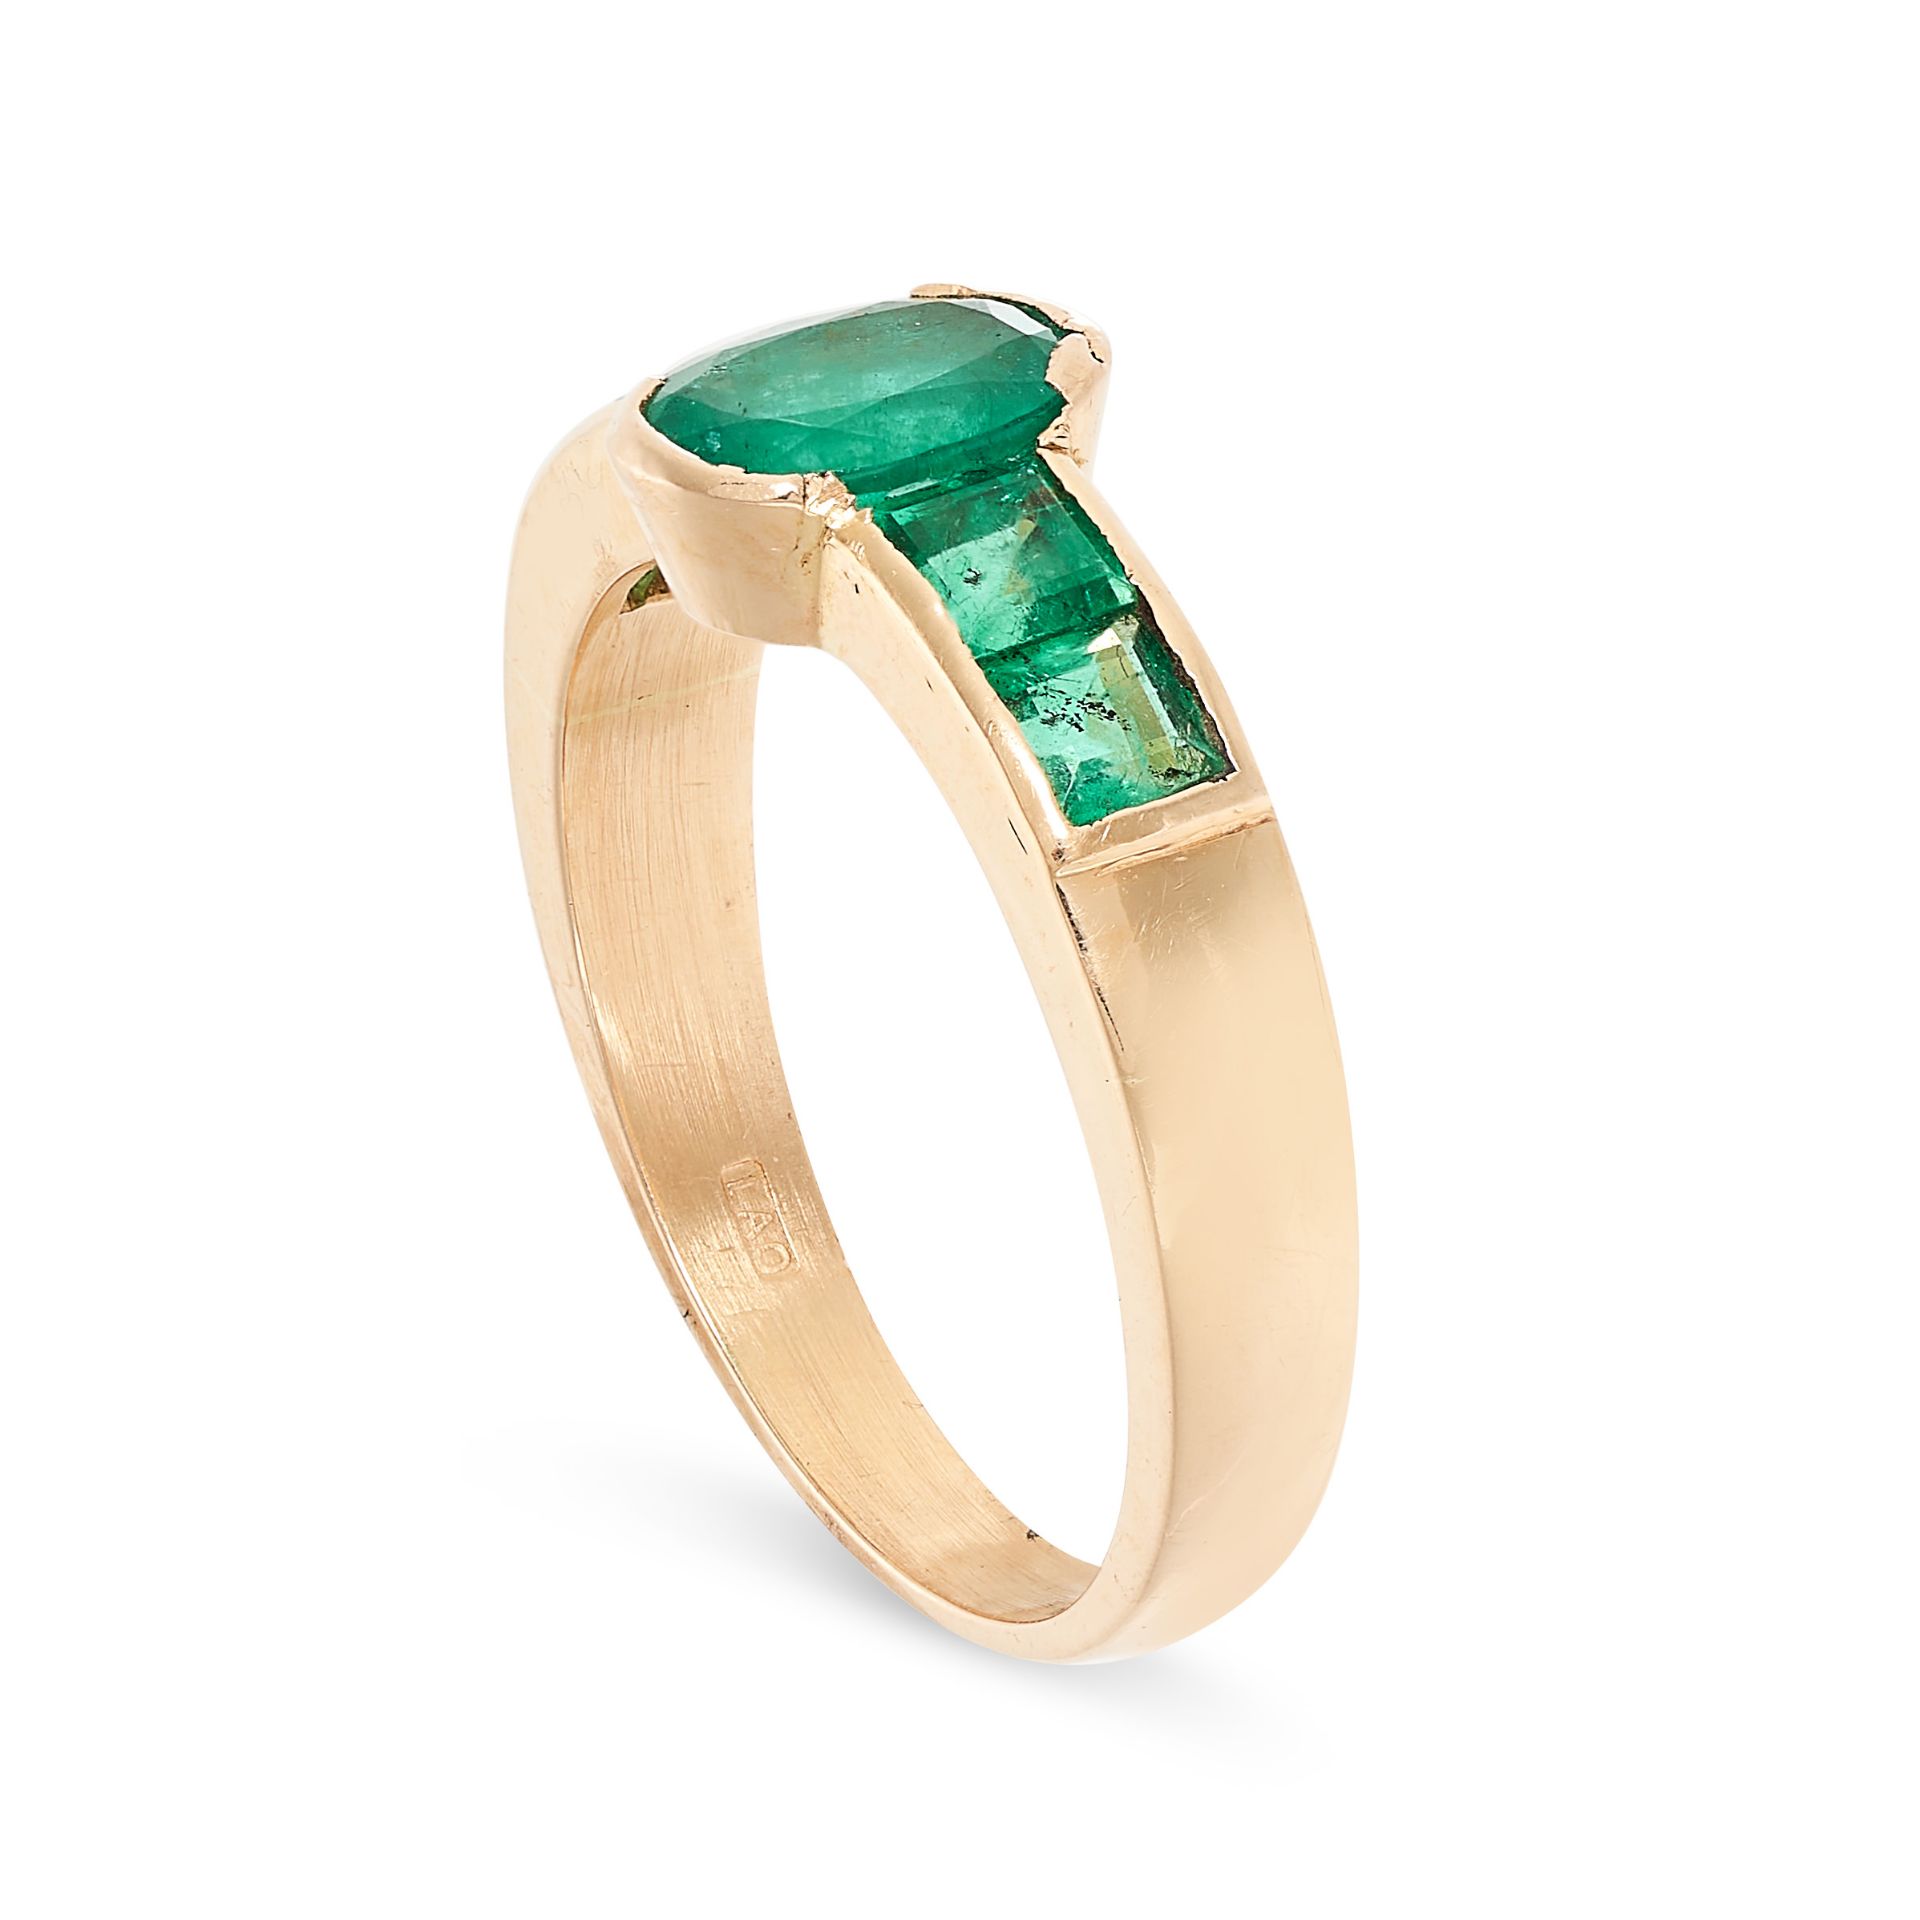 AN EMERALD DRESS RING in 18ct yellow gold, the band set with an oval cut emerald between step cut - Image 2 of 2